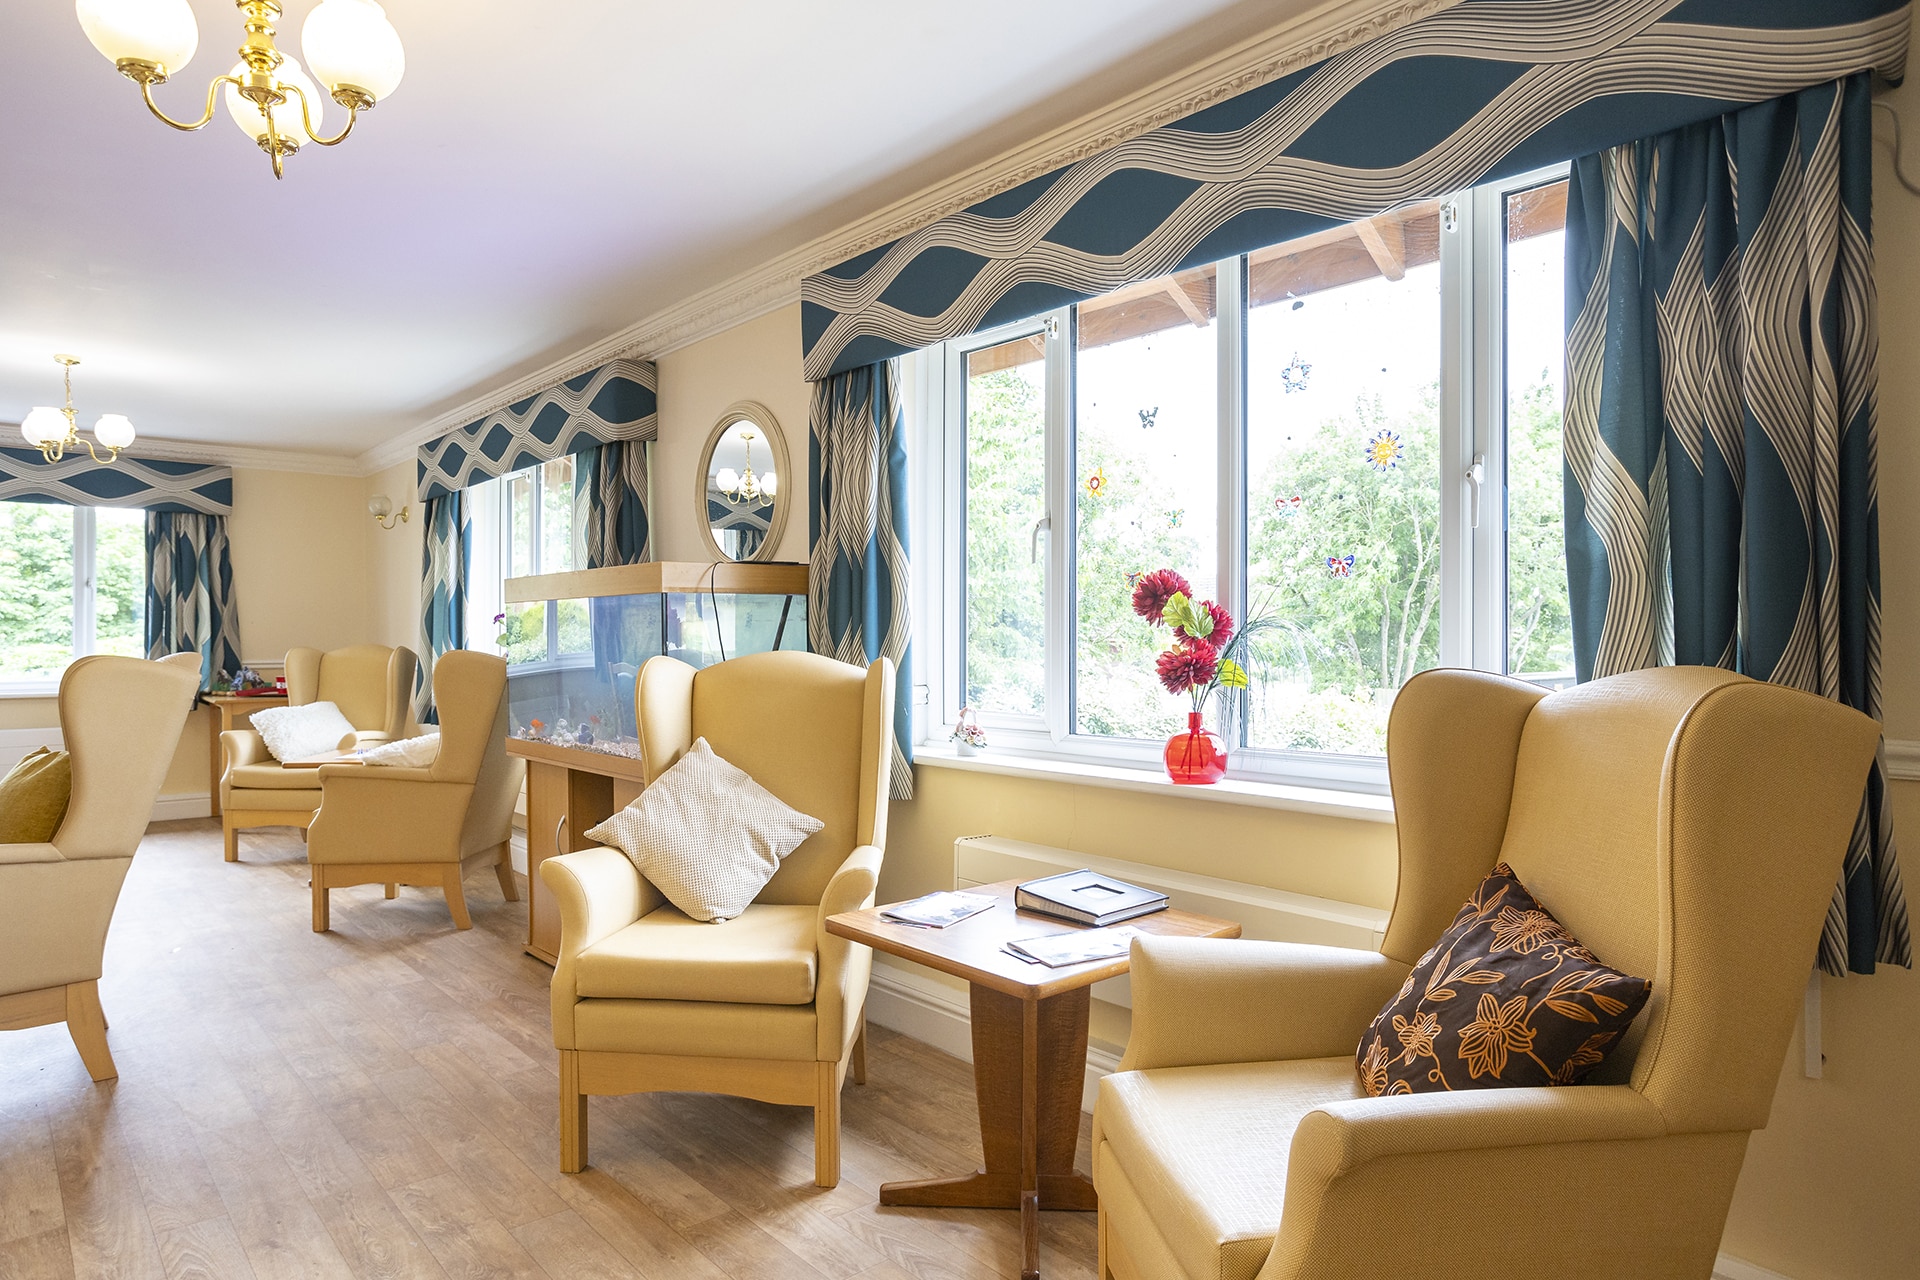 The main lounge at Lily House Care Home in Ely.